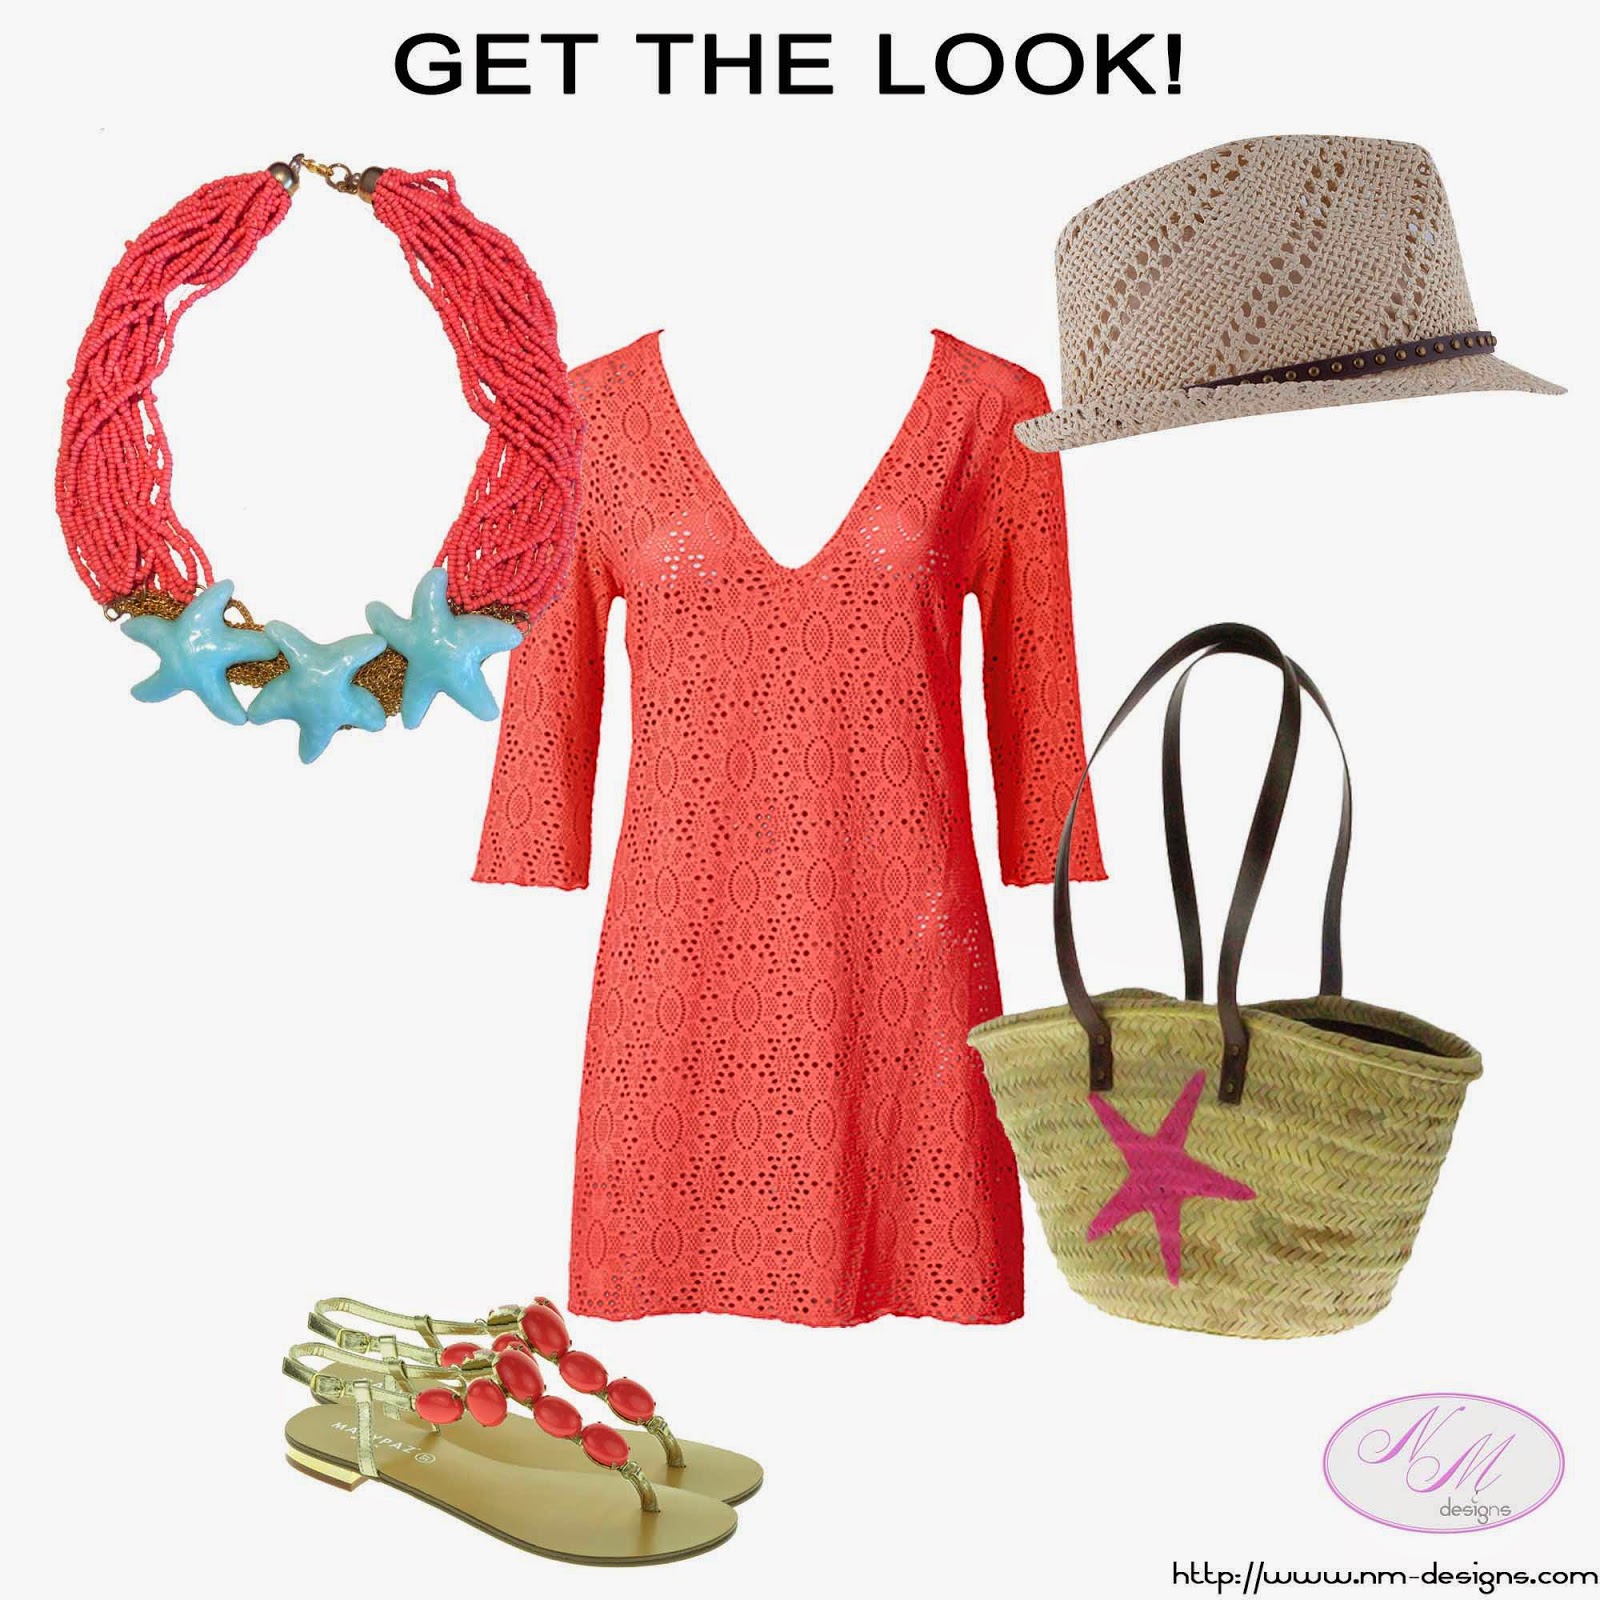 "GET THE LOOK" from 9th of July, 2014